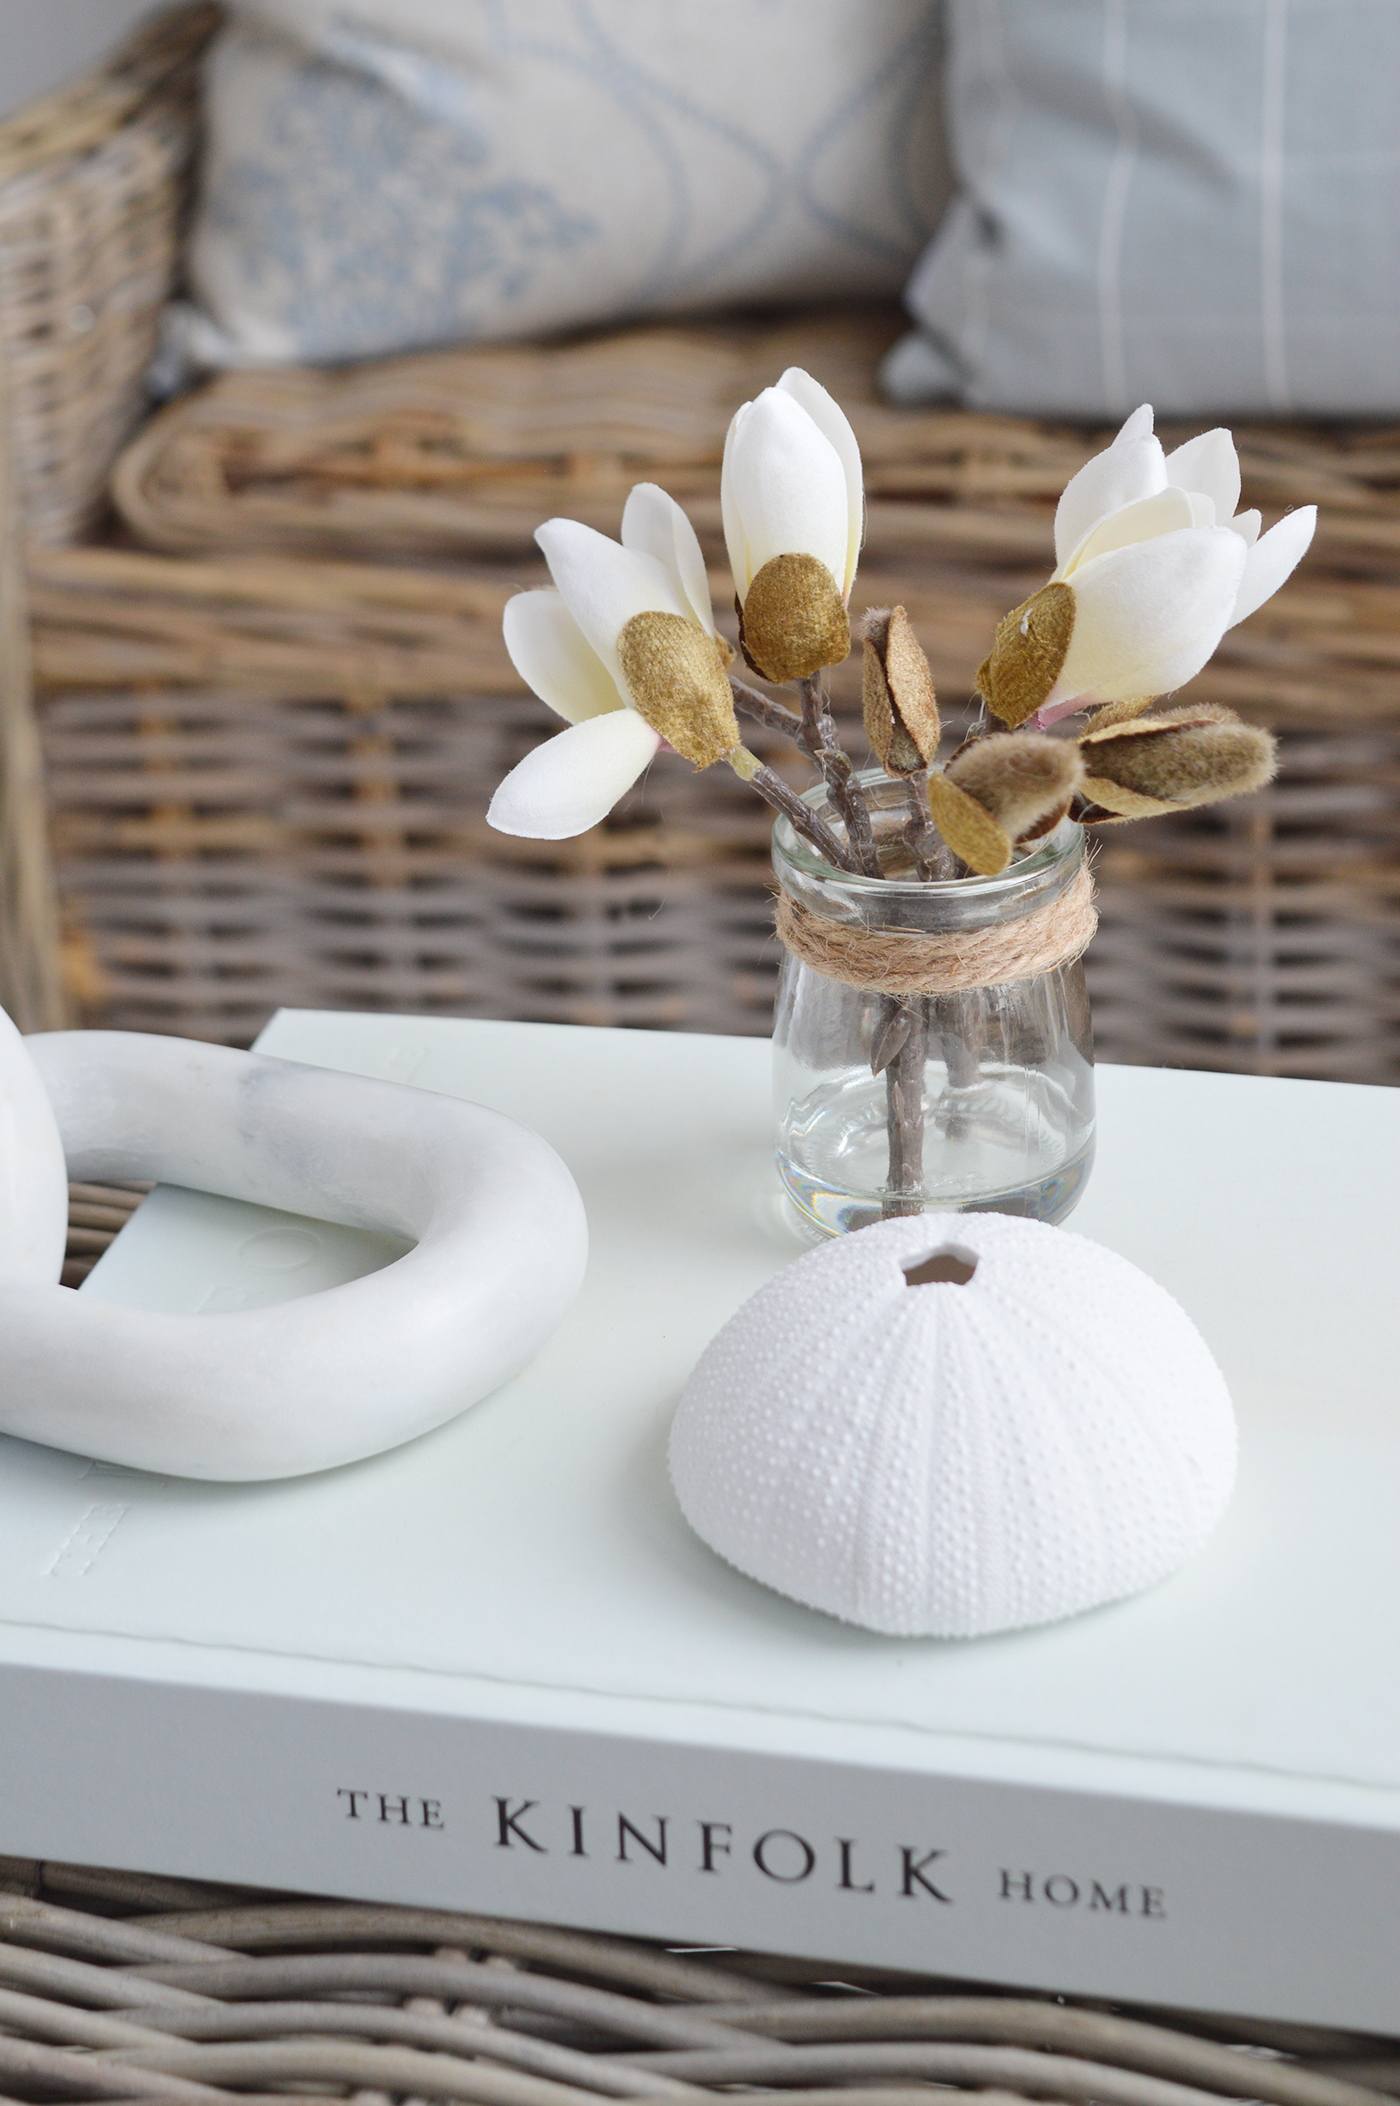 Coastal inspired interiors with the Magnolia sprig in a little bud vase with a faux white urchin